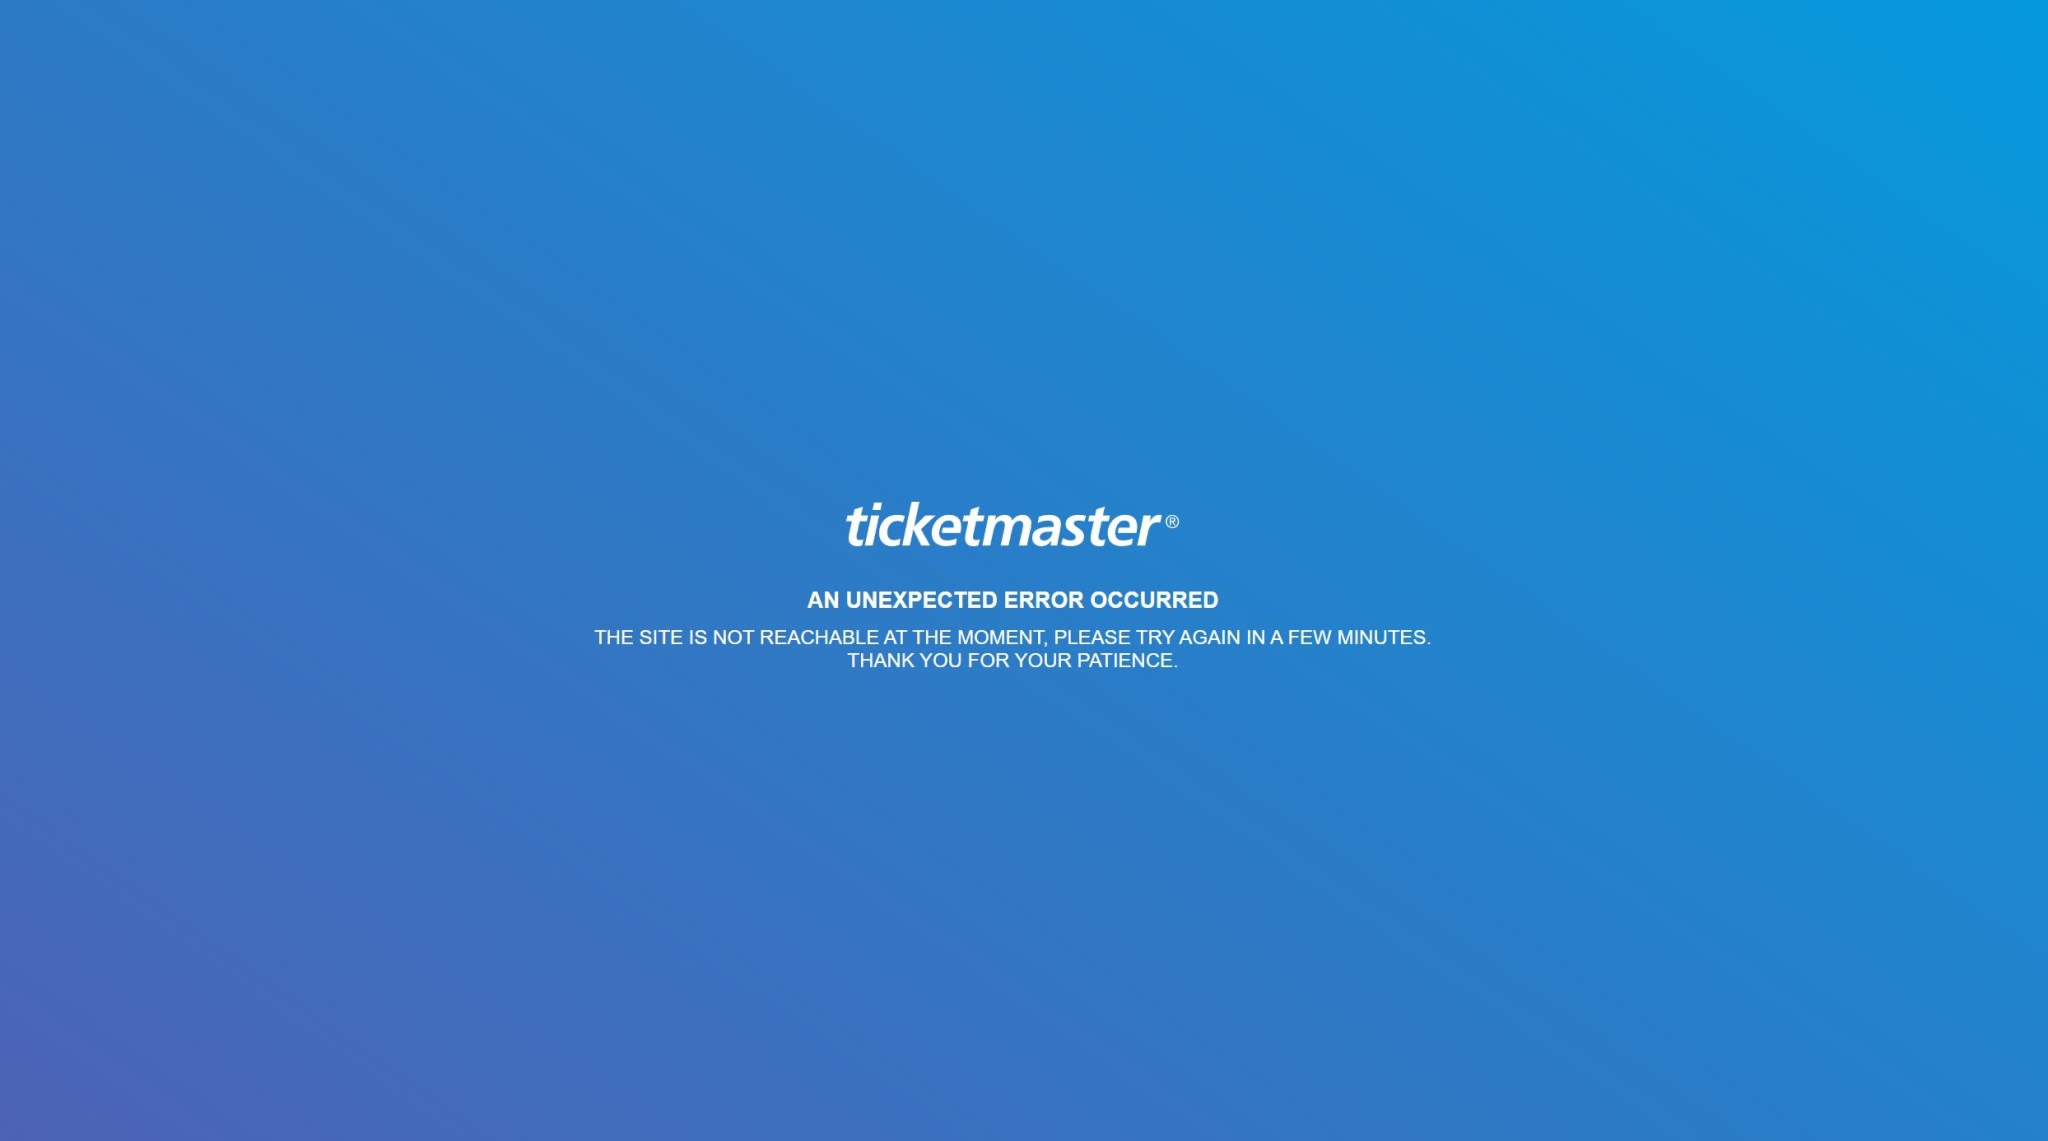 Live Nation’s $25 ticket offer backfires as people are unable to access the site